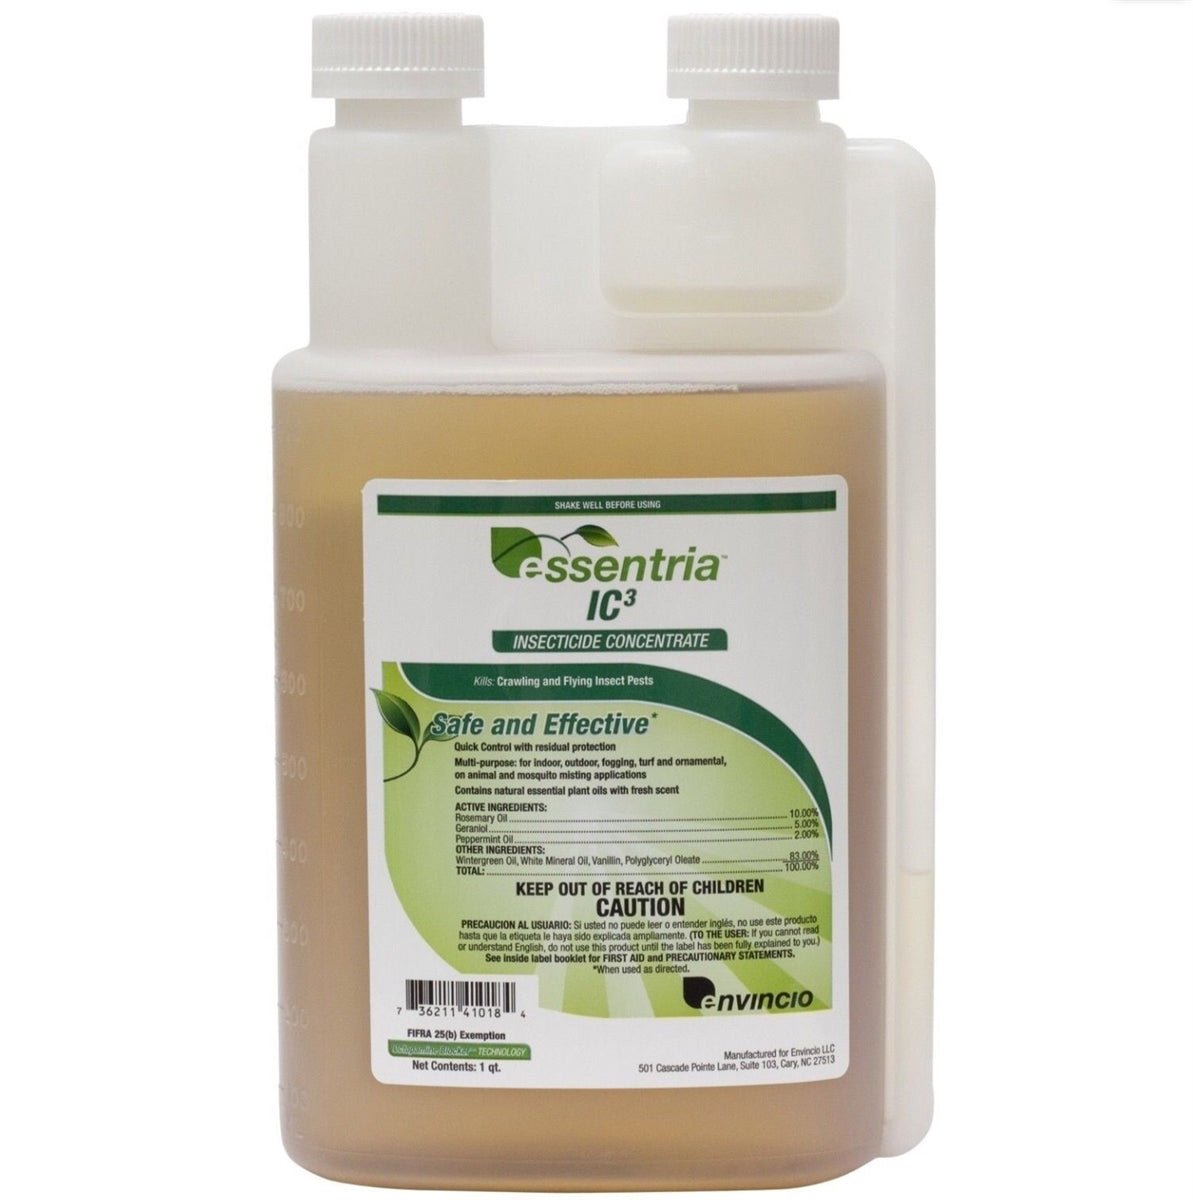 Essentria IC3 Insecticide Concentrate - 1 Qt. - Seed Barn